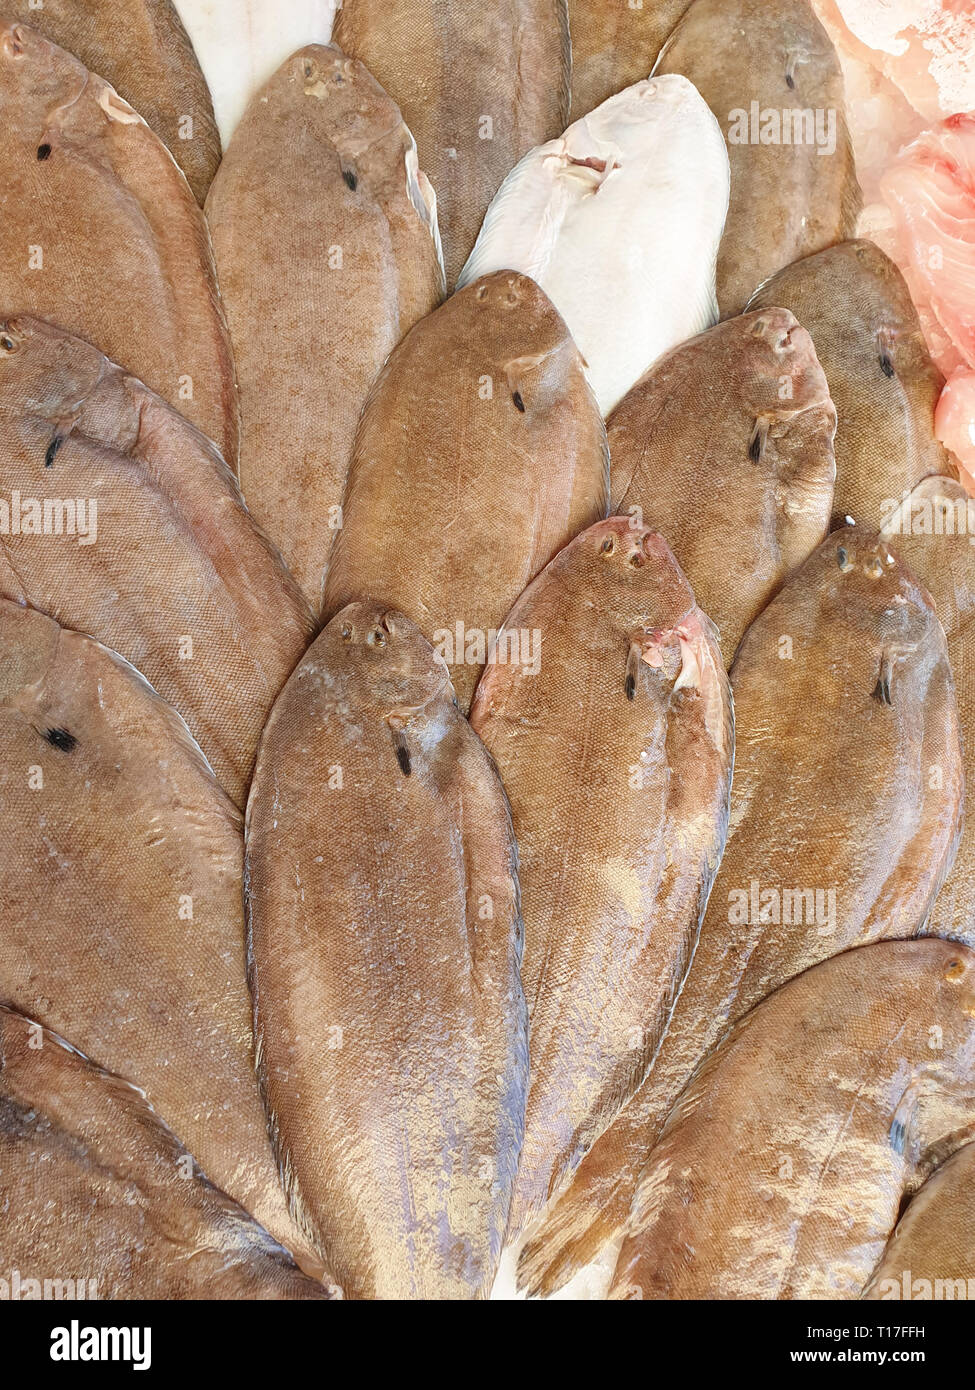 Sogliola fish on ice for sale, Fish local market stall with fresh seafood,view from top. Stock Photo